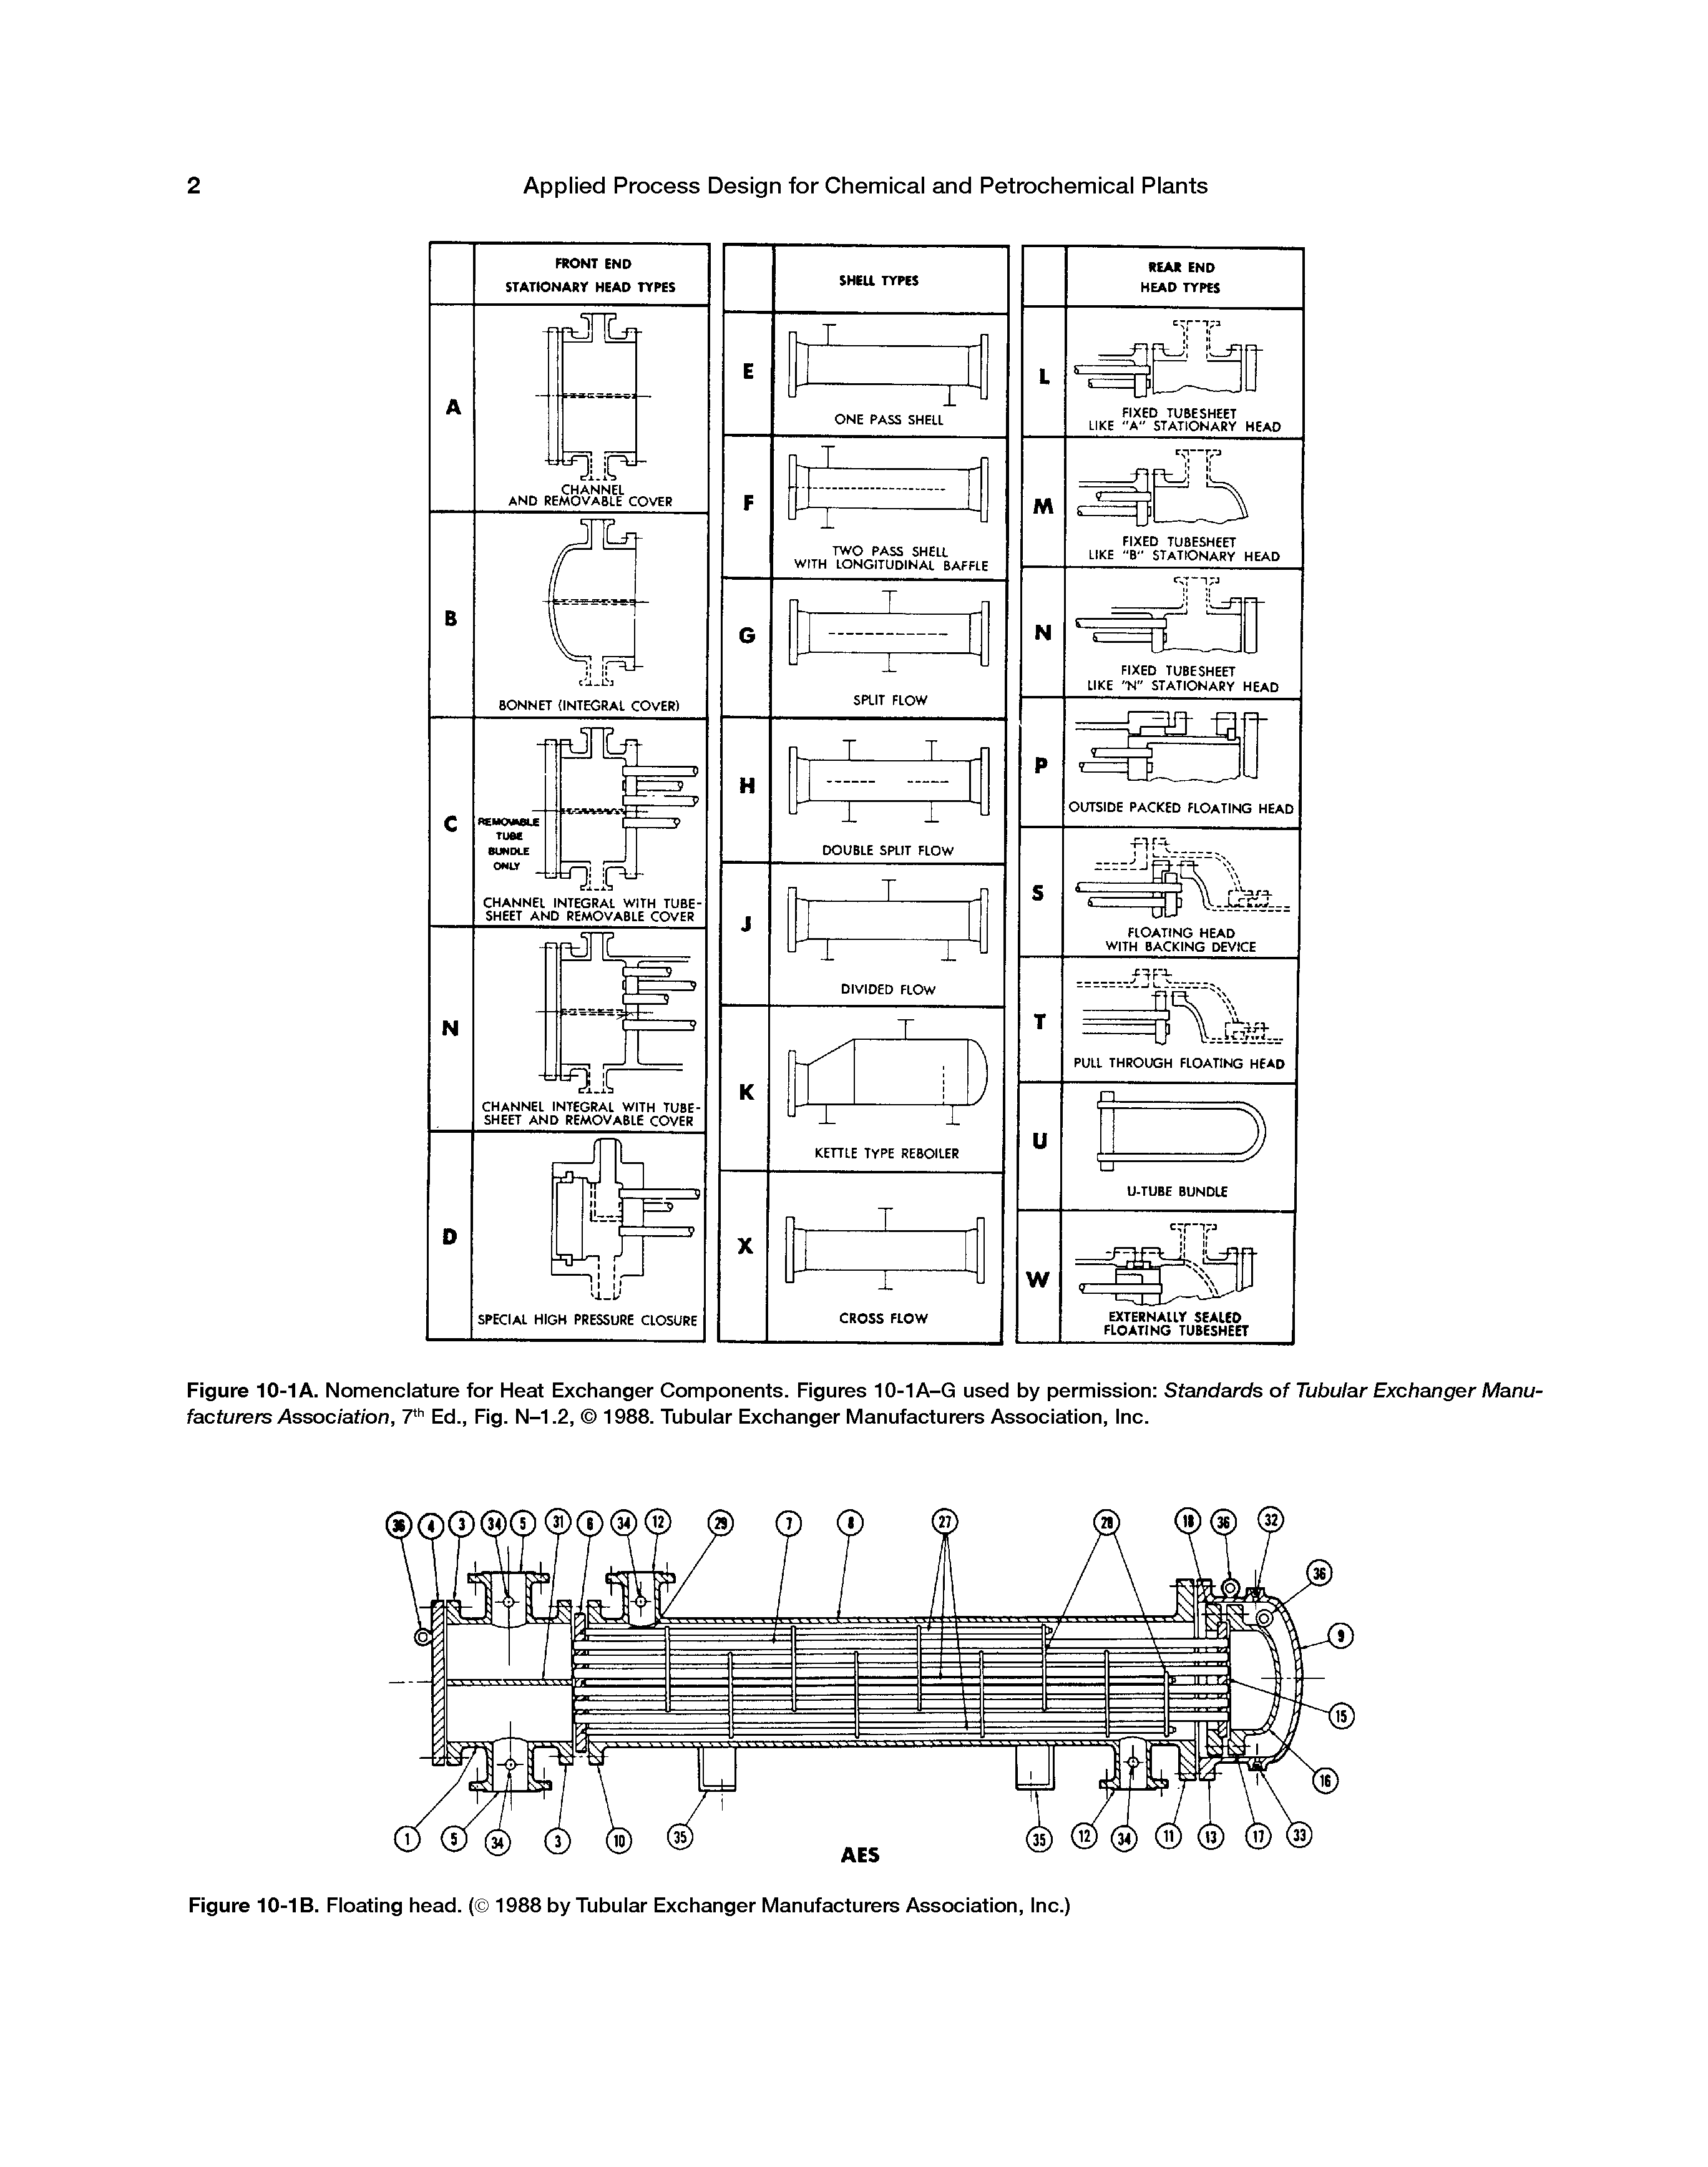 Figure 10-1A. Nomenclature for Heat Exchanger Components. Figures 10-1A-G used by permission Standards of Tubular Exchanger Manufacturers Association, 7 Ed., Fig. N-1.2, 1988. Tubular Exchanger Manufacturers Association, Inc.